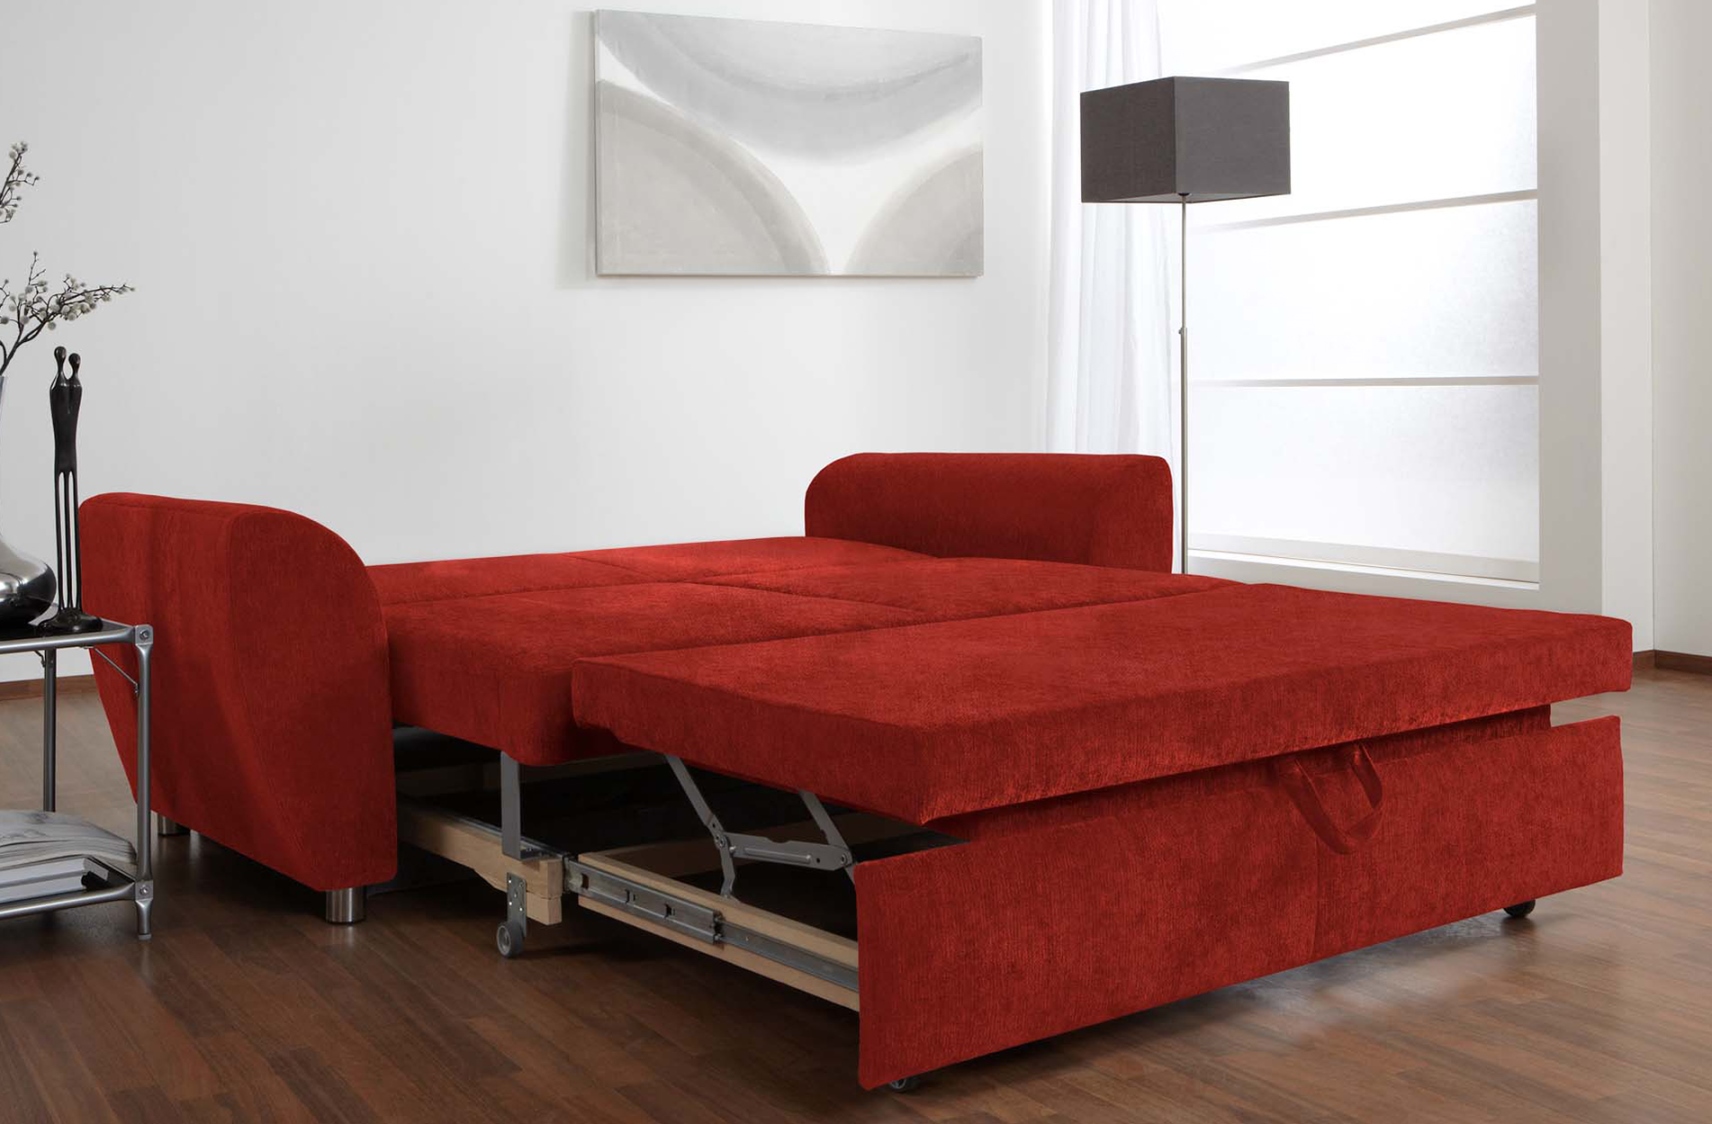 Essen Sleeper Sofa The best Pull out sofa bed by Nordholtz